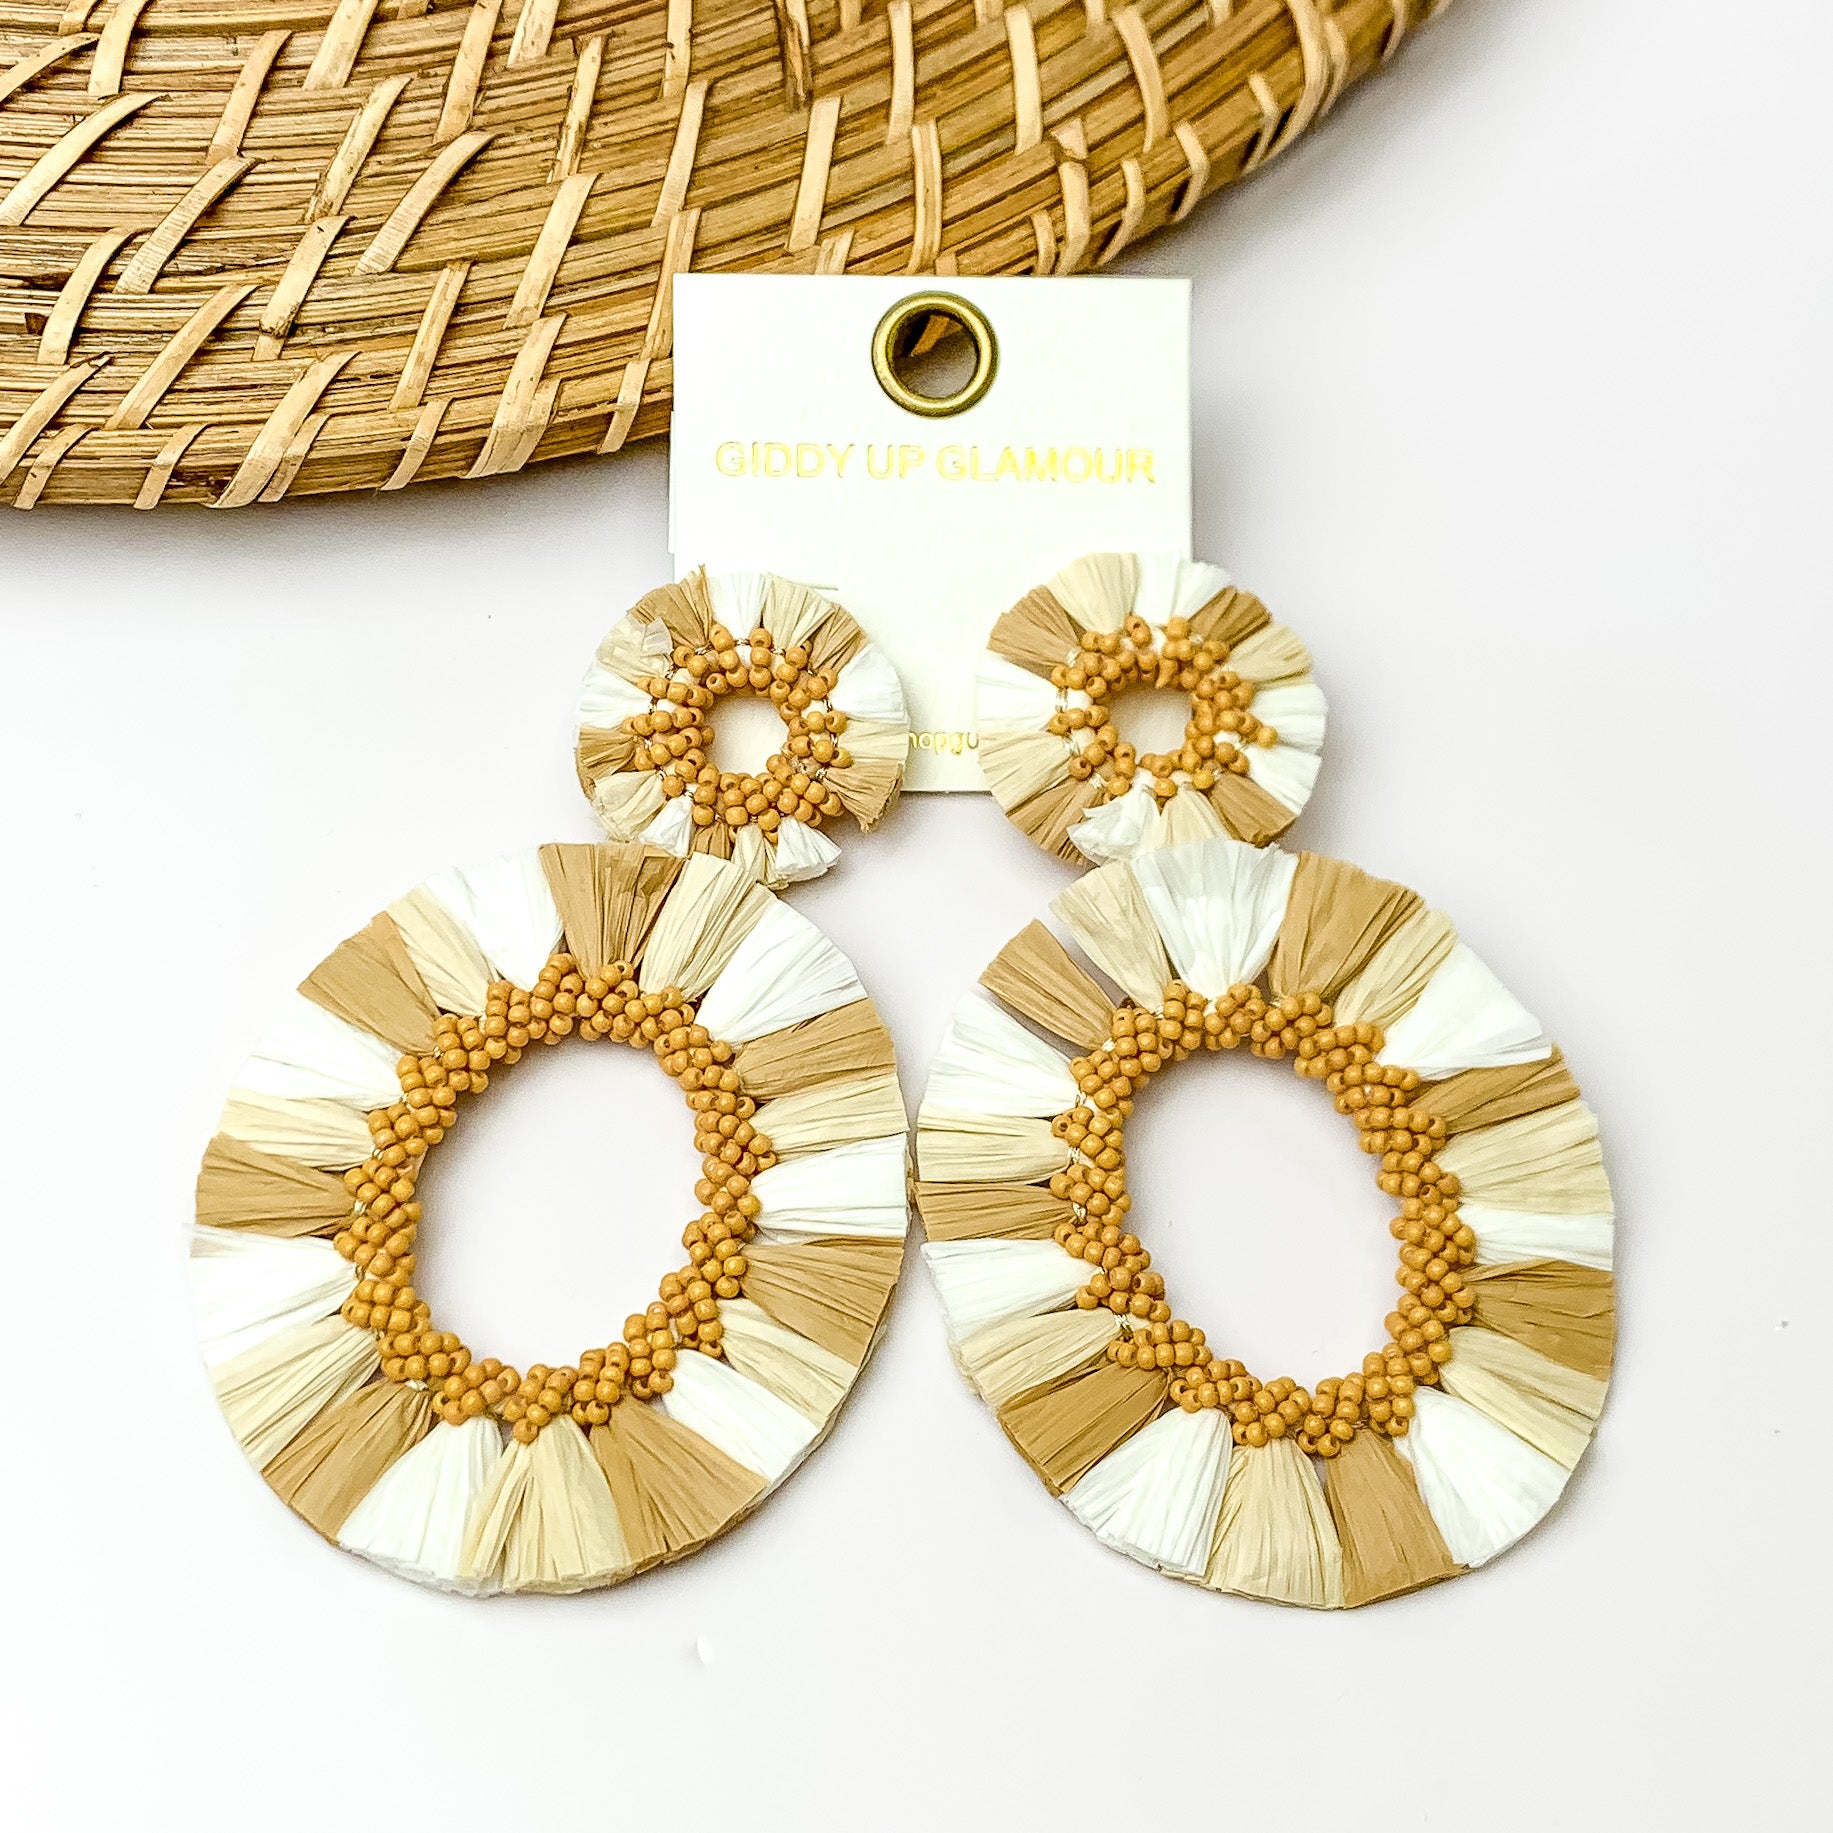 Image of Siesta Keys Raffia Wrapped Open Oval Earrings in White, and Shades of Tan